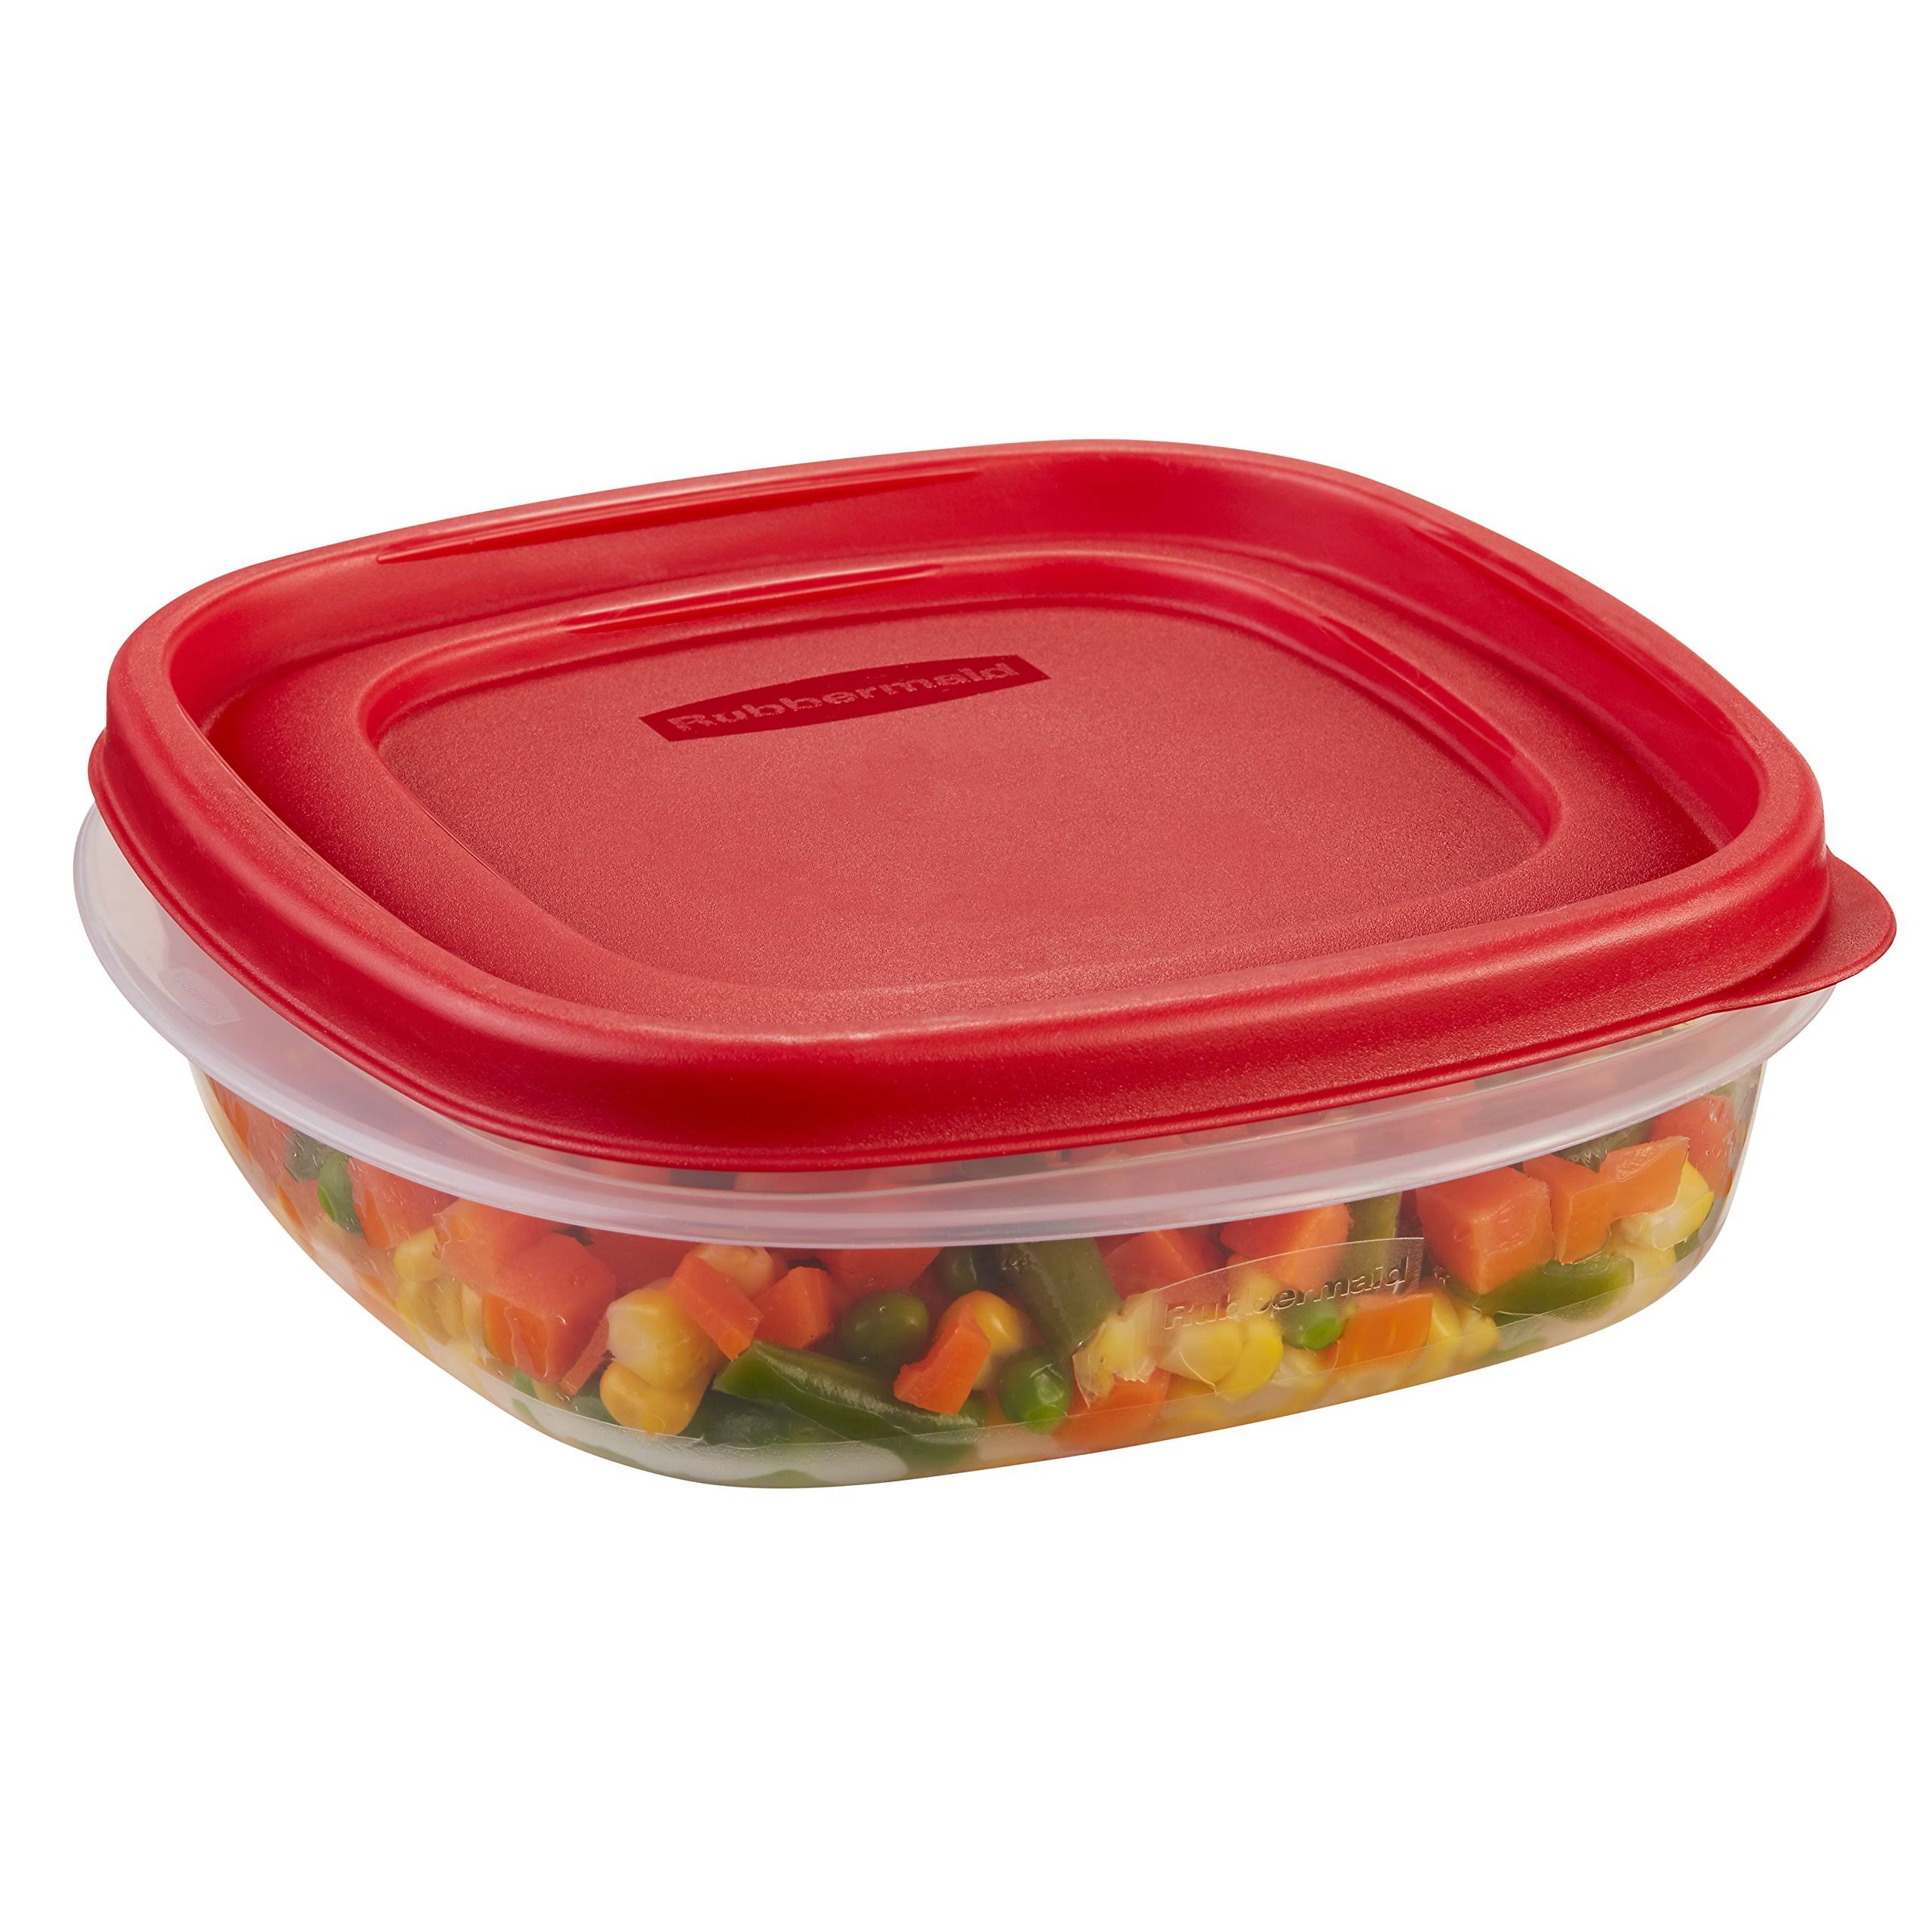 Easy-Find Lid Food Storage Container, 3-cups, Rubbermaid, 1777086